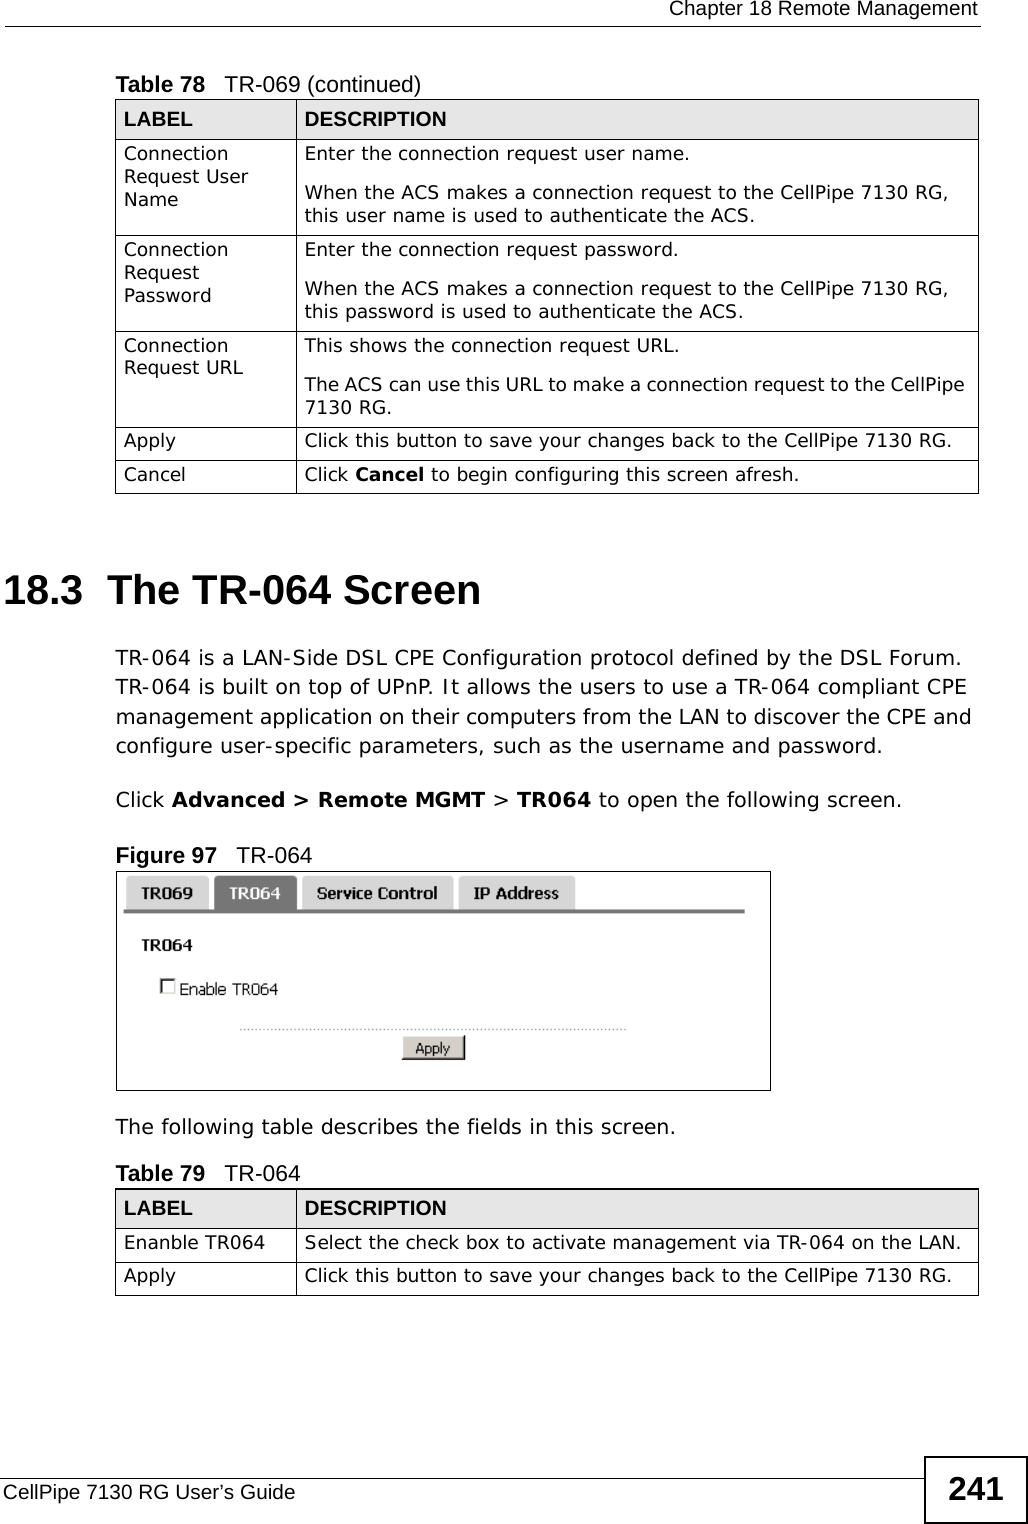  Chapter 18 Remote ManagementCellPipe 7130 RG User’s Guide 24118.3  The TR-064 ScreenTR-064 is a LAN-Side DSL CPE Configuration protocol defined by the DSL Forum. TR-064 is built on top of UPnP. It allows the users to use a TR-064 compliant CPE management application on their computers from the LAN to discover the CPE and configure user-specific parameters, such as the username and password.Click Advanced &gt; Remote MGMT &gt; TR064 to open the following screen.  Figure 97   TR-064 The following table describes the fields in this screen. Connection Request User NameEnter the connection request user name.When the ACS makes a connection request to the CellPipe 7130 RG, this user name is used to authenticate the ACS.Connection Request PasswordEnter the connection request password.When the ACS makes a connection request to the CellPipe 7130 RG, this password is used to authenticate the ACS.Connection Request URL This shows the connection request URL.The ACS can use this URL to make a connection request to the CellPipe 7130 RG.Apply Click this button to save your changes back to the CellPipe 7130 RG.Cancel Click Cancel to begin configuring this screen afresh.Table 78   TR-069 (continued)LABEL DESCRIPTIONTable 79   TR-064LABEL DESCRIPTIONEnanble TR064 Select the check box to activate management via TR-064 on the LAN.Apply Click this button to save your changes back to the CellPipe 7130 RG.